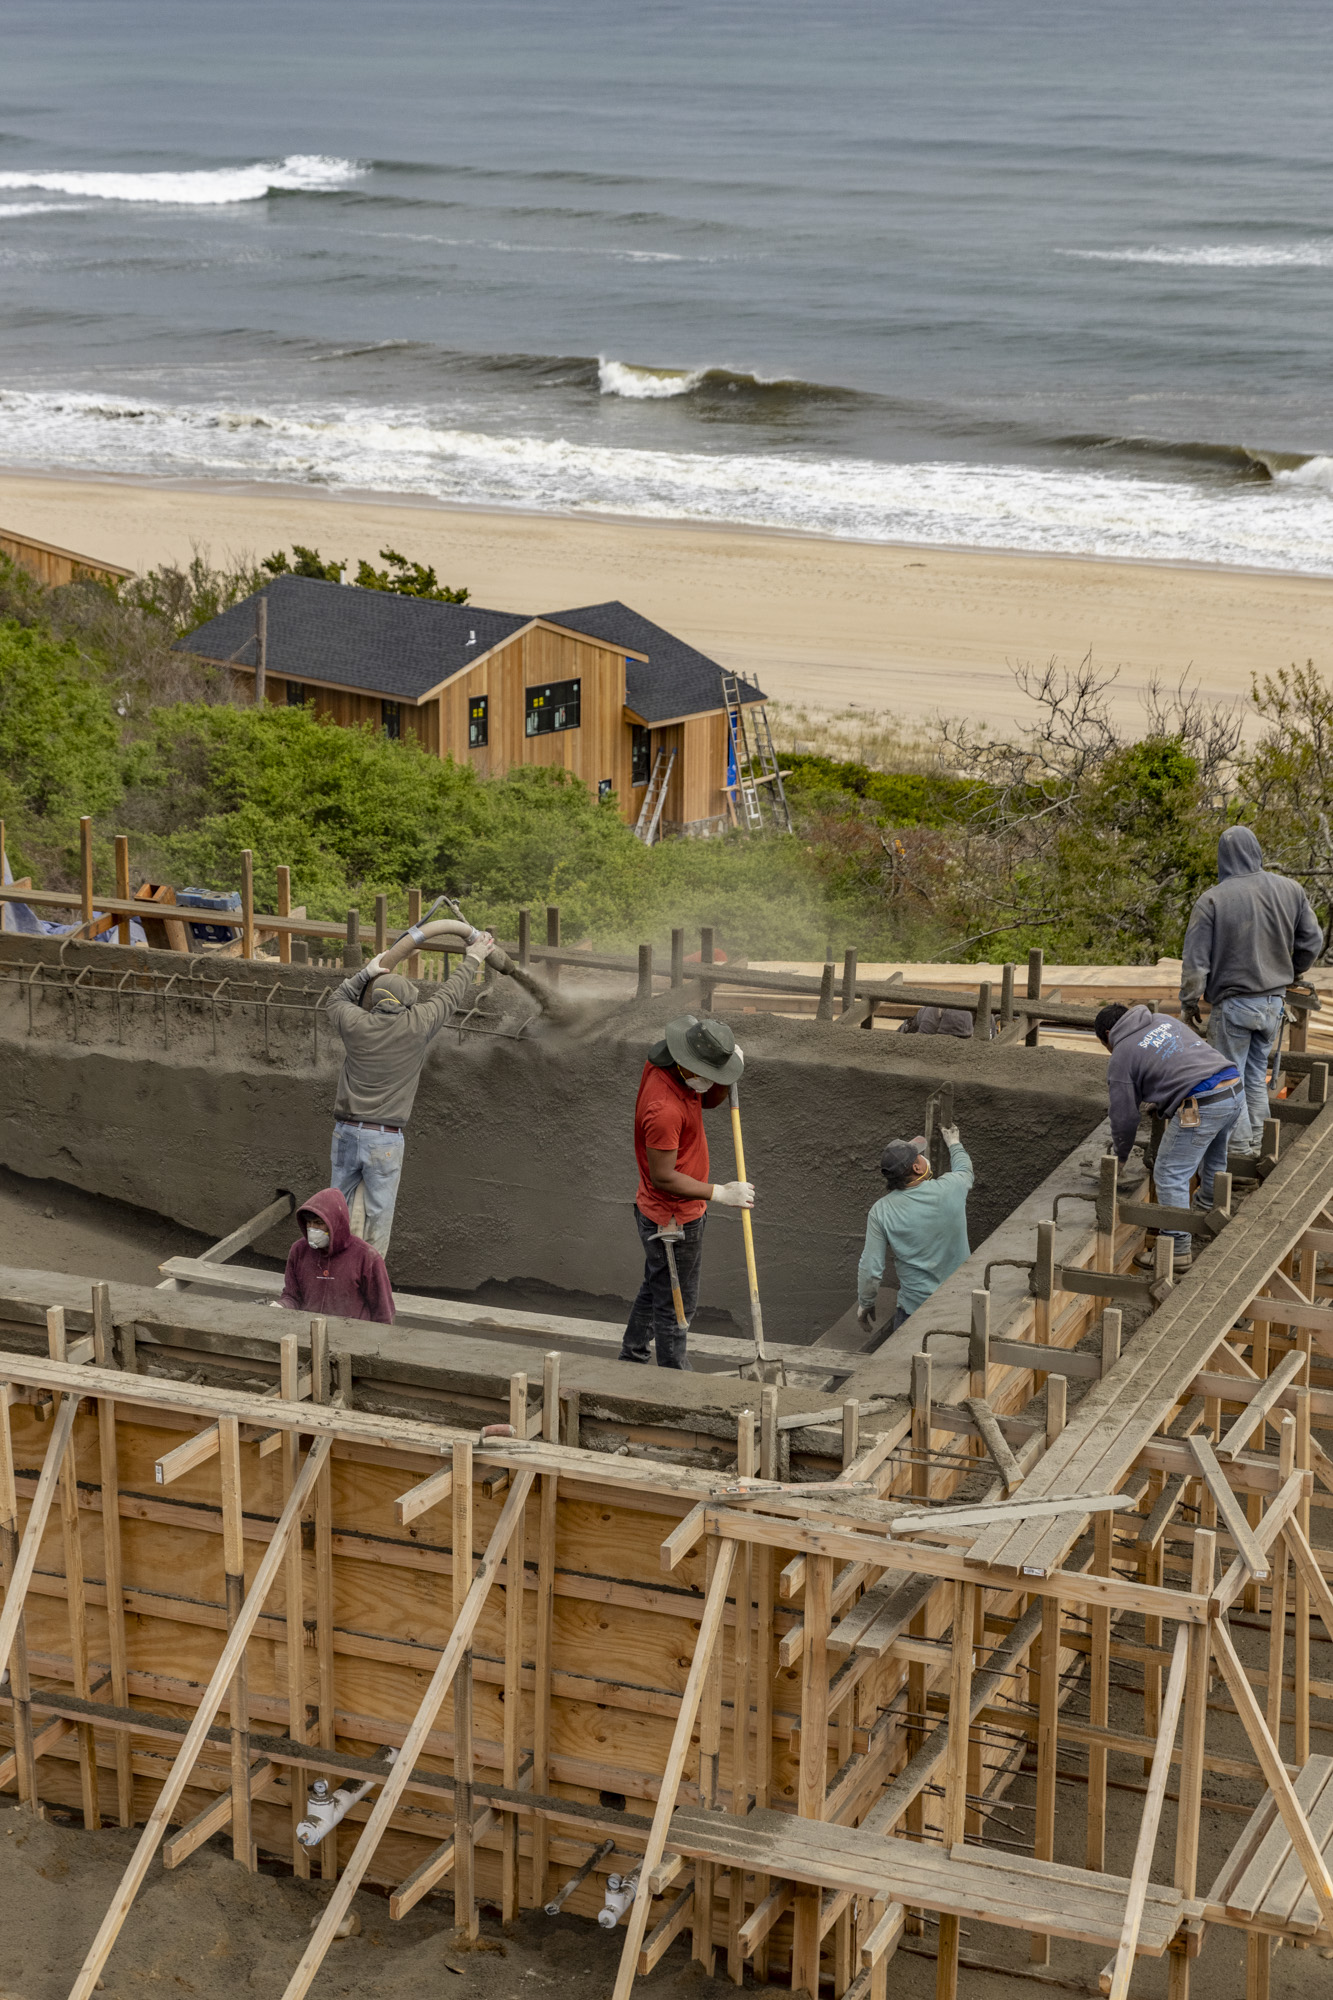 Constructing a pool by the beach in the Hamptons